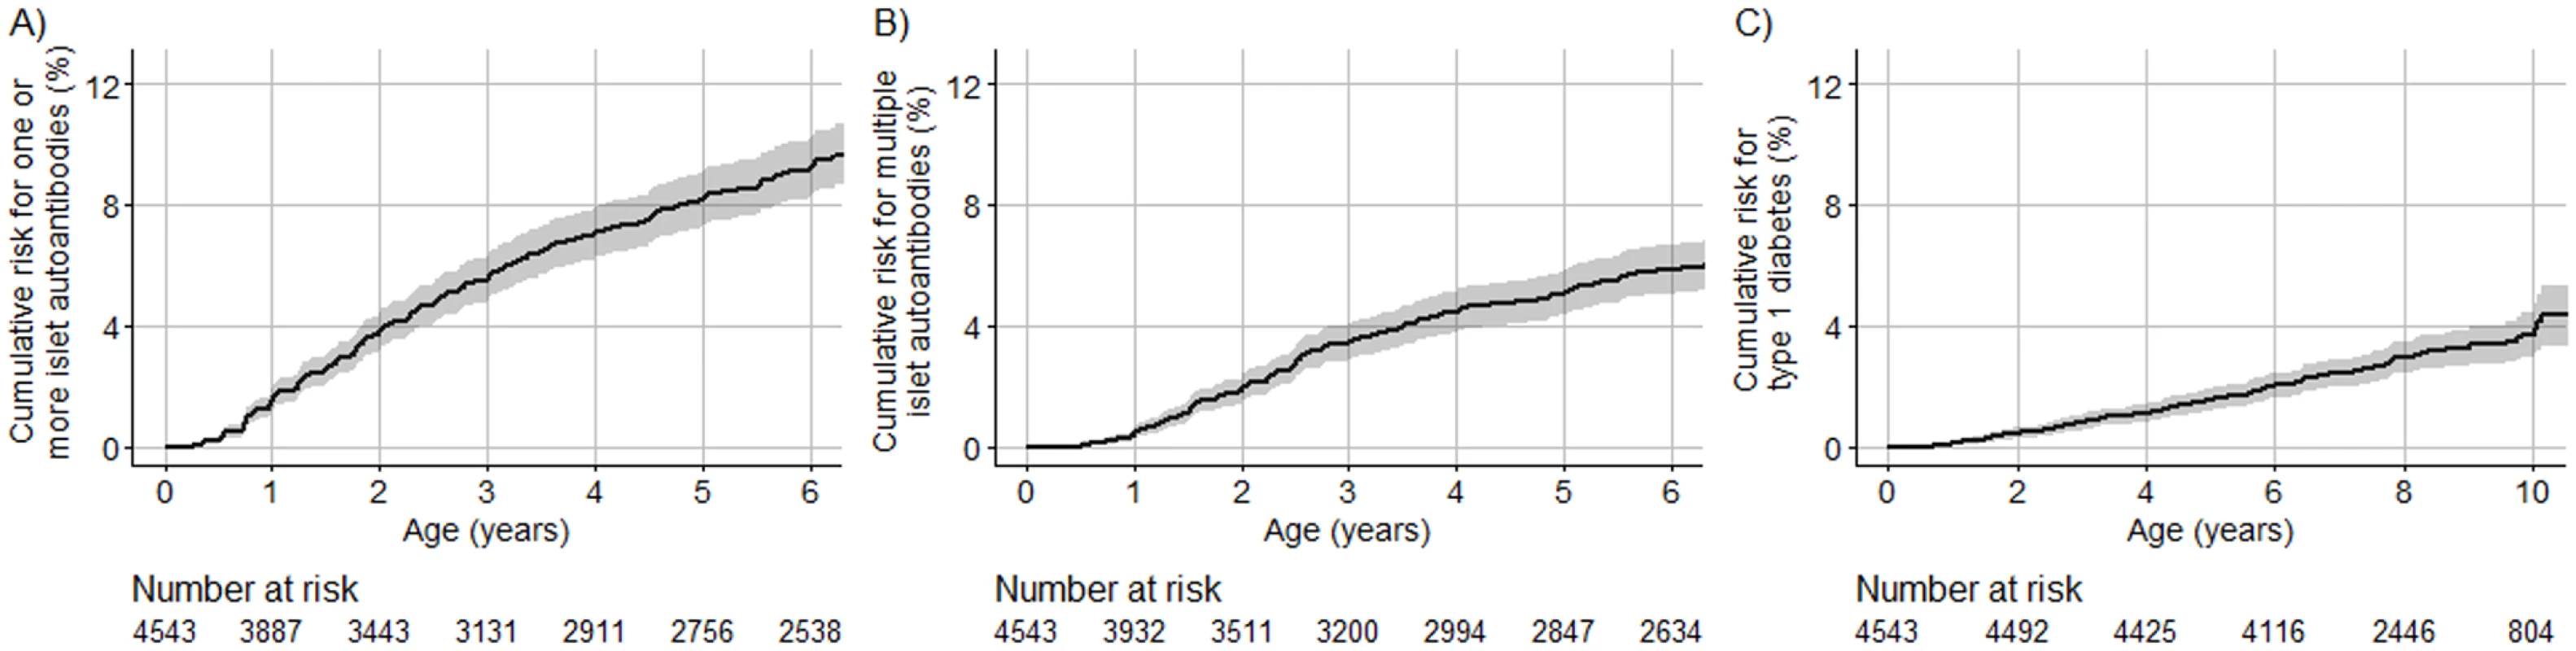 Cumulative risks of 1 or more islet autoantibody, multiple islet autoantibody, and type 1 diabetes in TEDDY children with the HLA DR3/DR4-DQ8 or DR4-DQ8/DR4-DQ8 genotype.